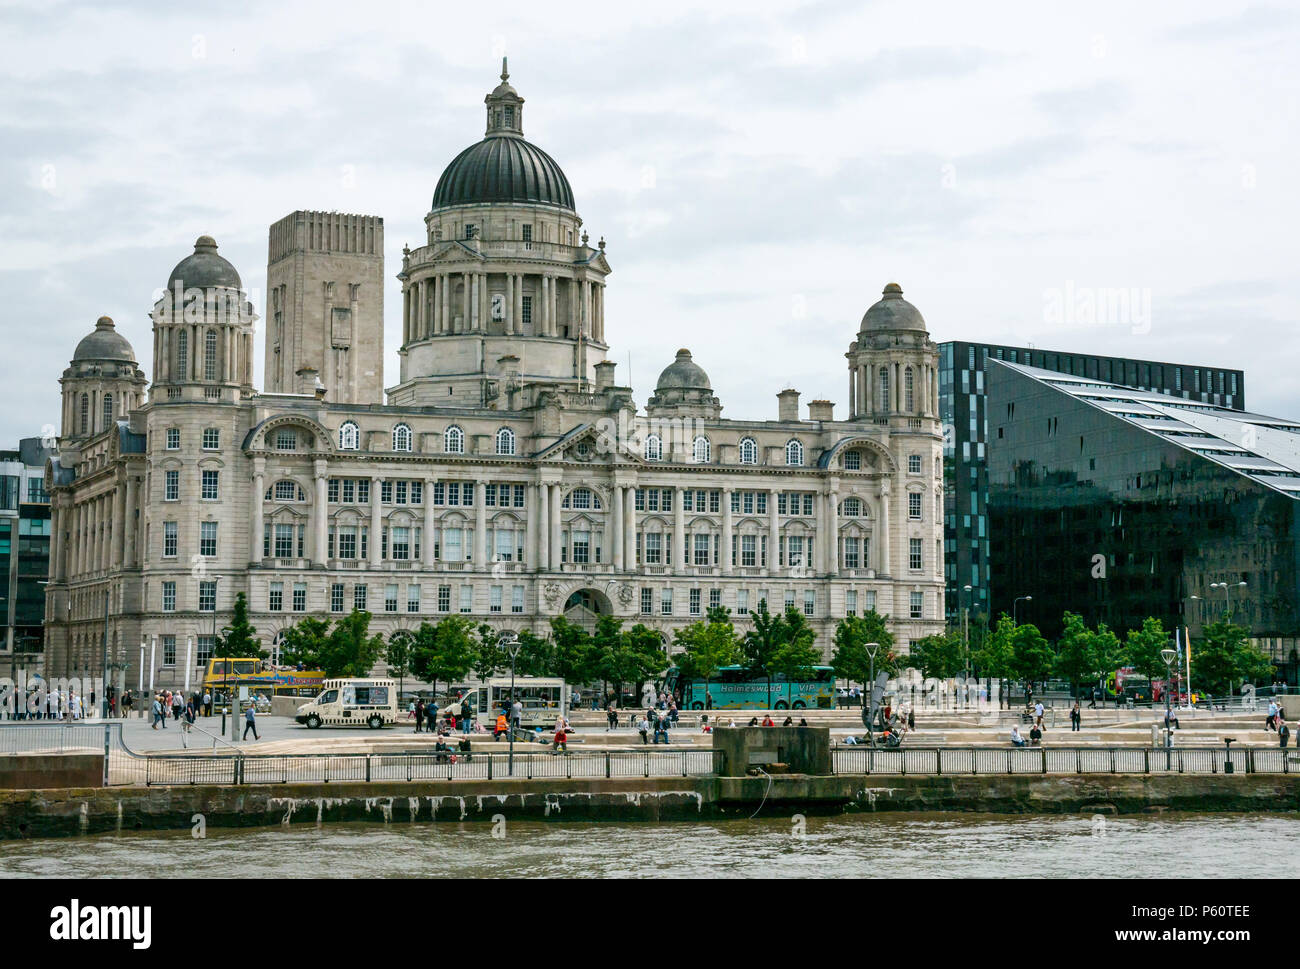 One of the Three Graces, domed grand Edwardian Baroque style Port of Liverpool building, Pier Head, Liverpool, England, UK seen from River Mersey Stock Photo